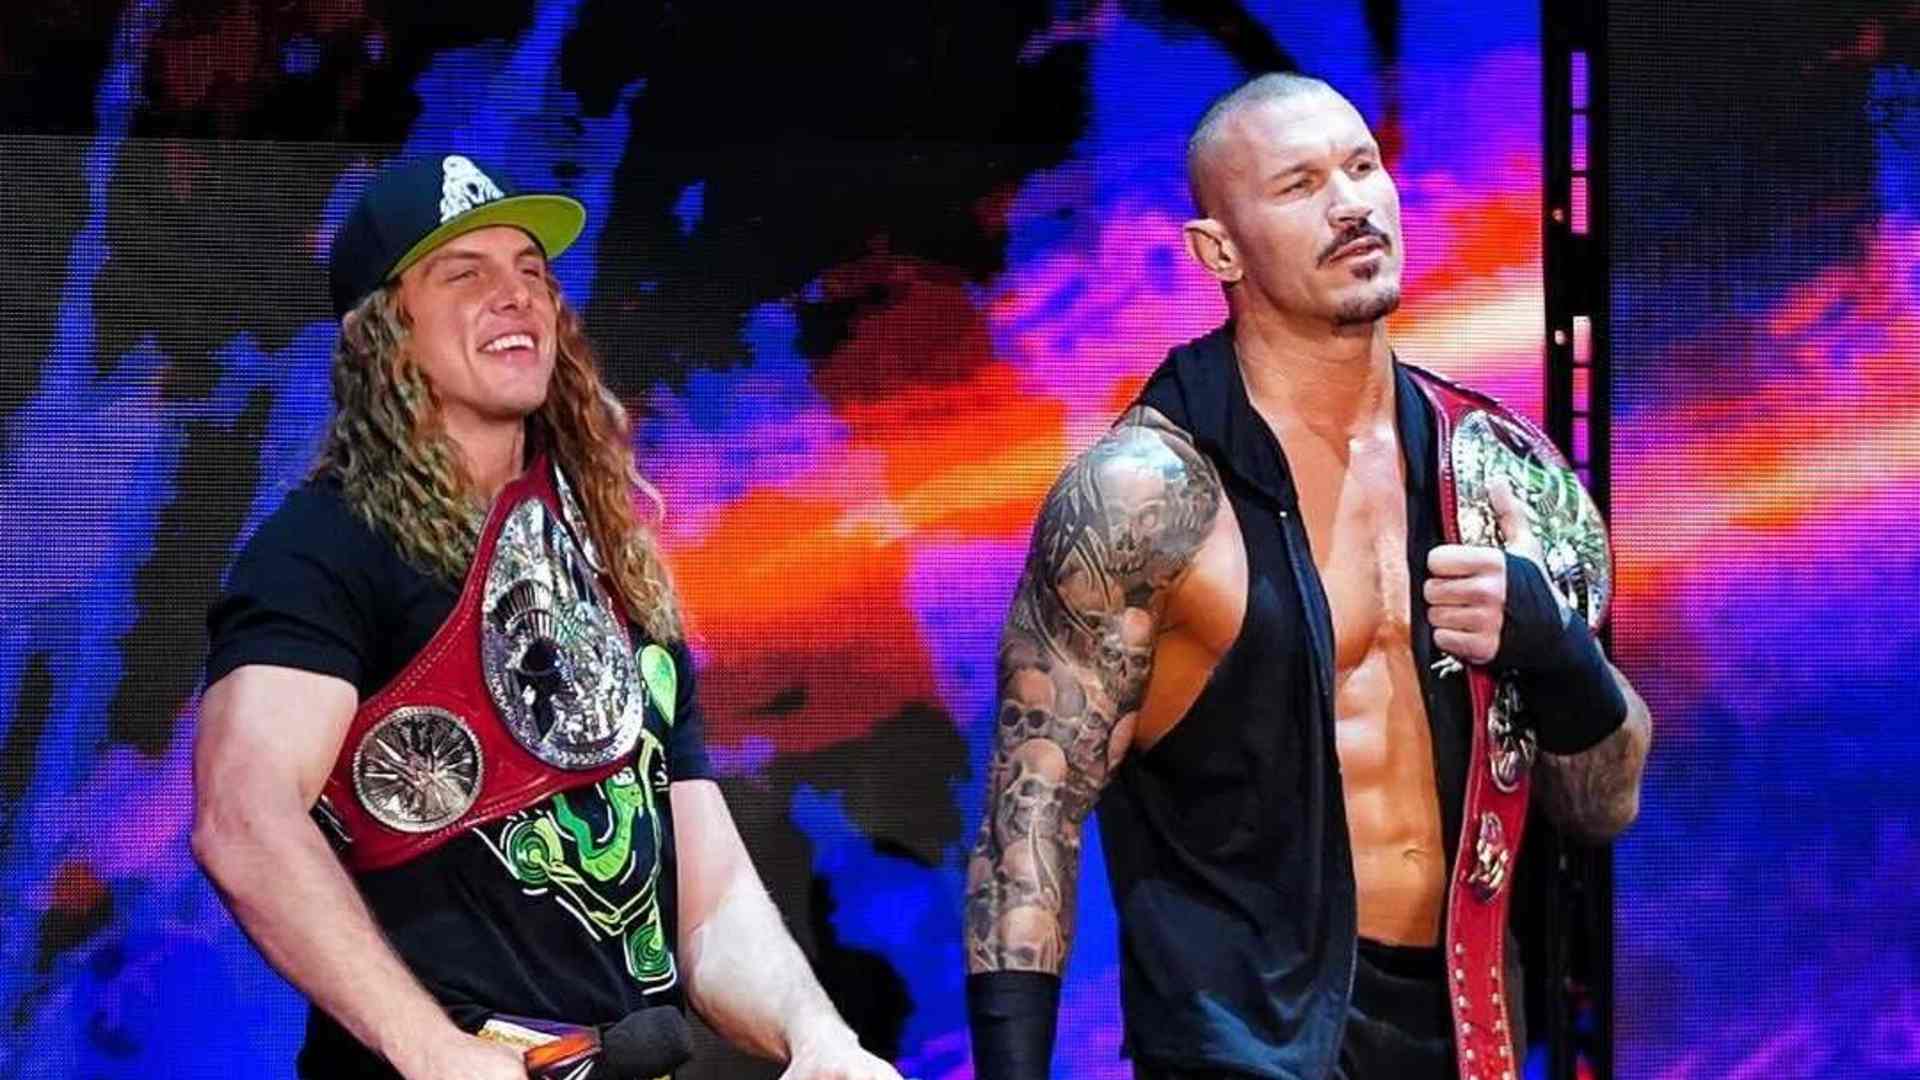 WWE Rumors: WWE Possibly Trying to Split RK-Bro: Check Why?